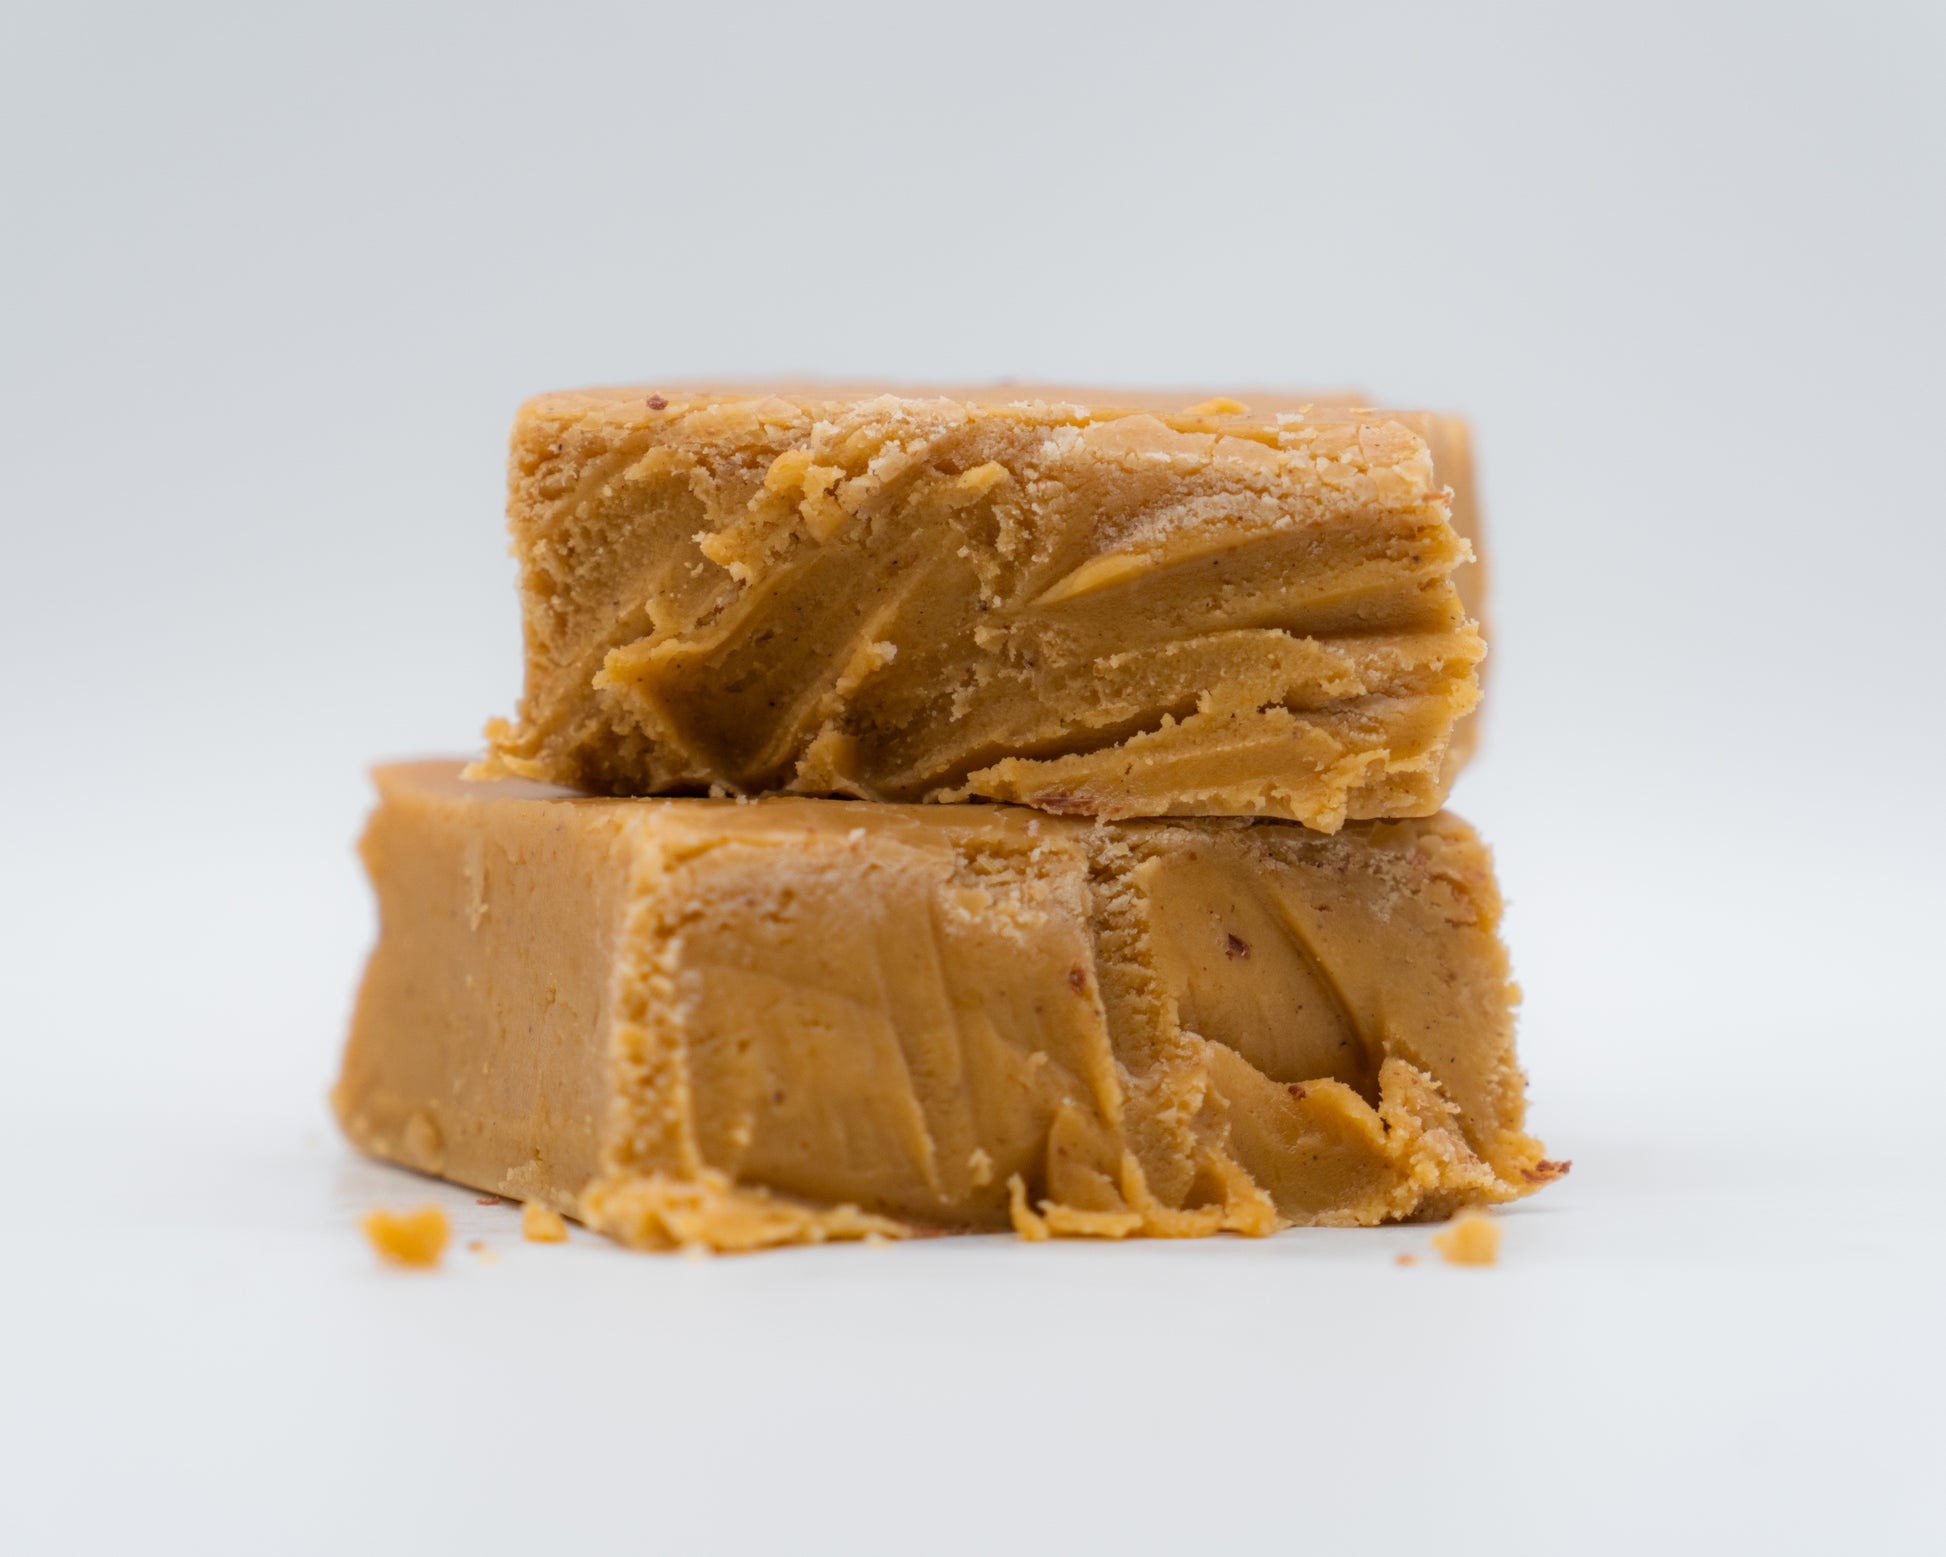 Pumpkin Spice Fudge from Stage Stop Candy